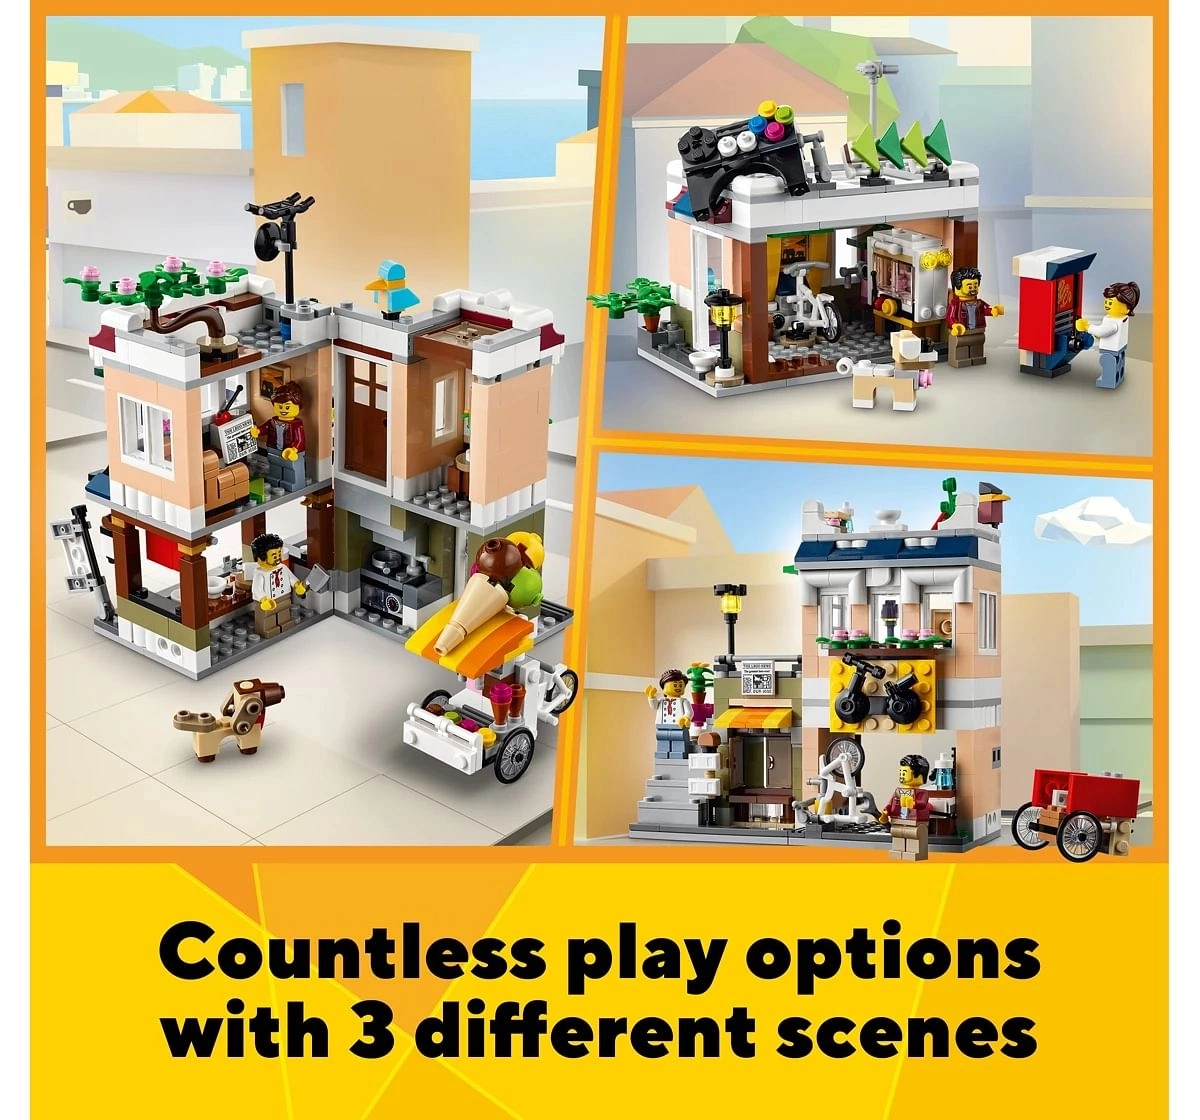 Lego Creator 3in1 Downtown Noodle Shop Building Toy Set for Boys, Girls and Kids Ages 8+  Features a Townhouse, Bike Shop or Arcade (569 Pieces)